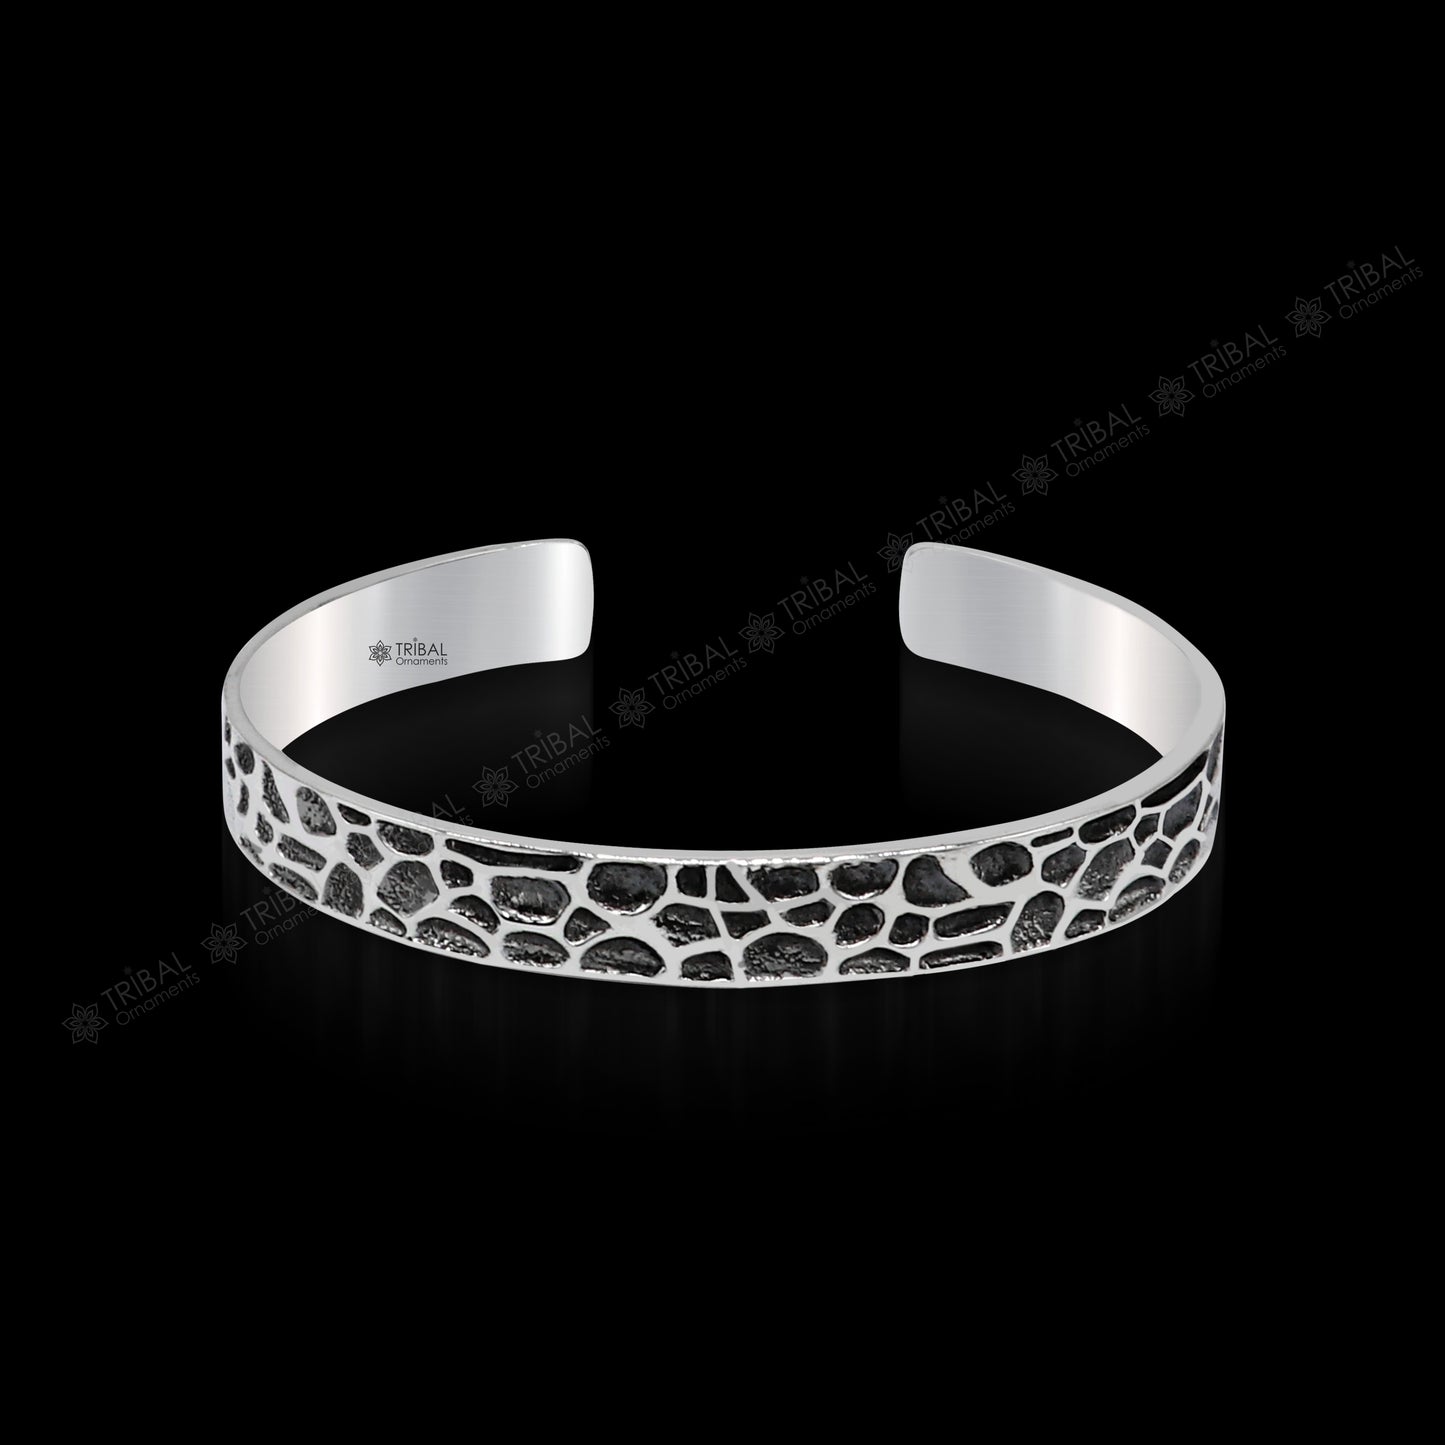 Authentic 925 sterling silver exclusive design handmade cuff kada bracelet, easy to adjust with your wrist, unisex jewelry cuff43